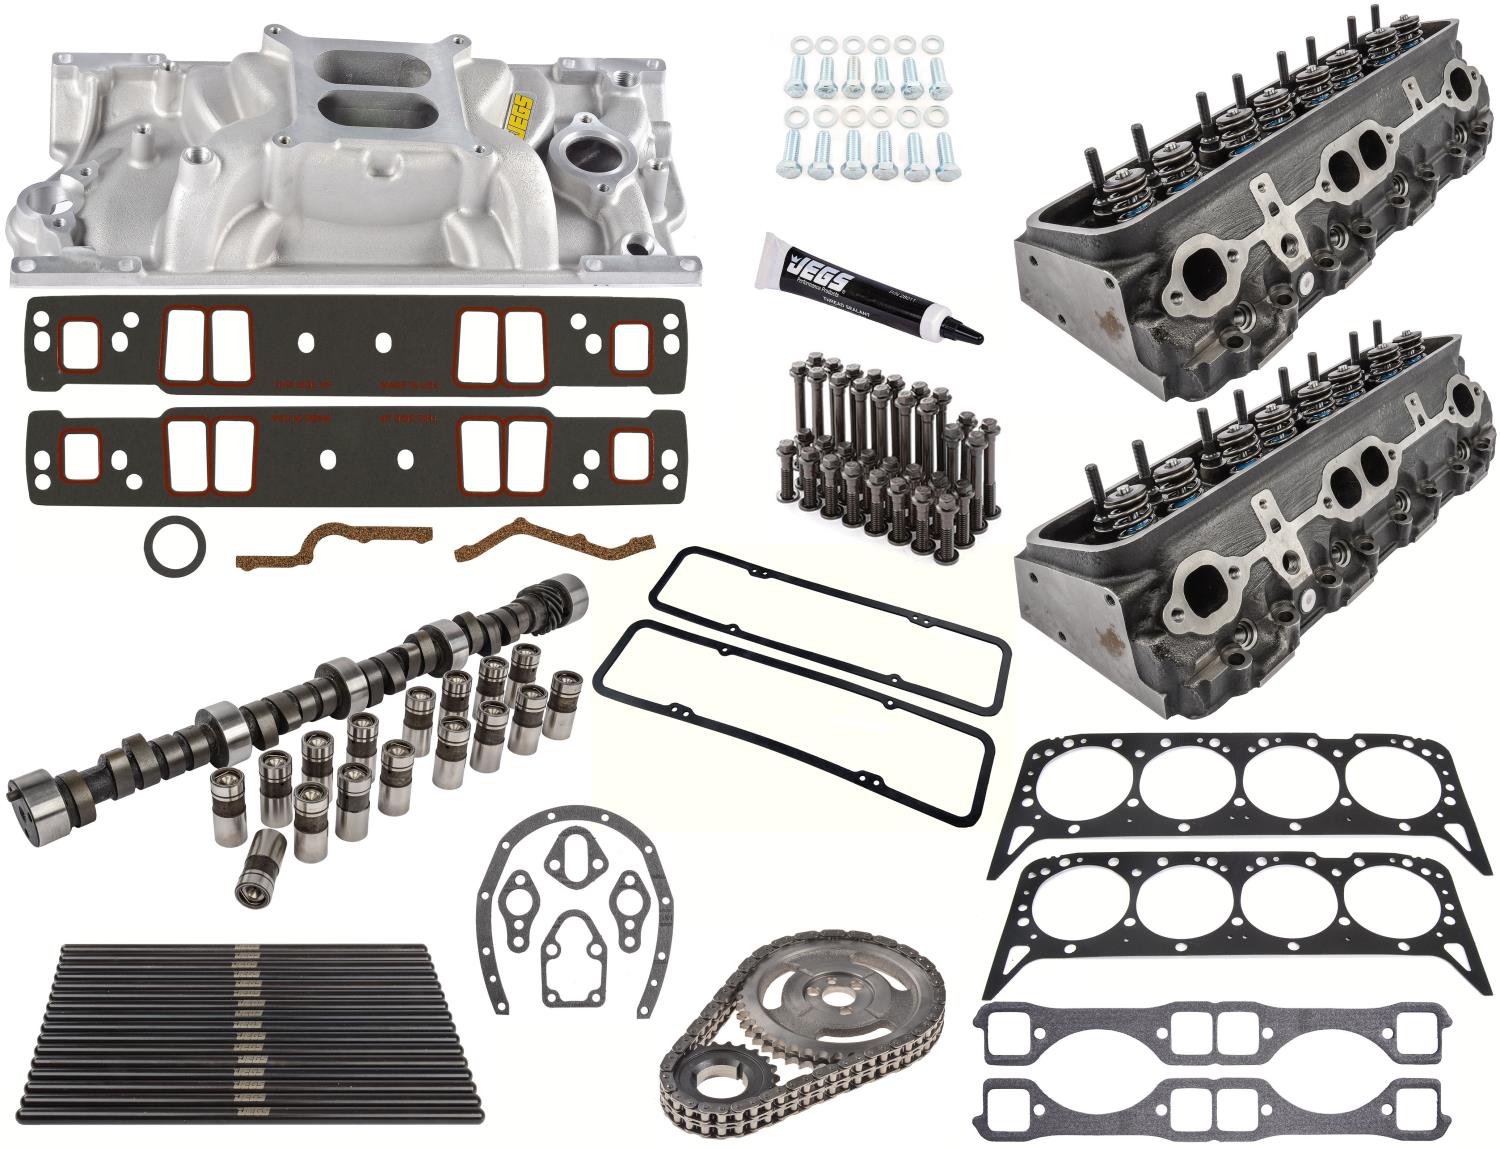 JEGS 514170: Vortec Top End Kit Includes, Intake  Exhaust Gaskets, Head  Gaskets, Timing Cover Gasket Set, Valve Cover Gaskets, Pushrods, Head Bolt  Kit, Manifold Bolts, Thread Sealant, Intake Manifold, Camshaft,